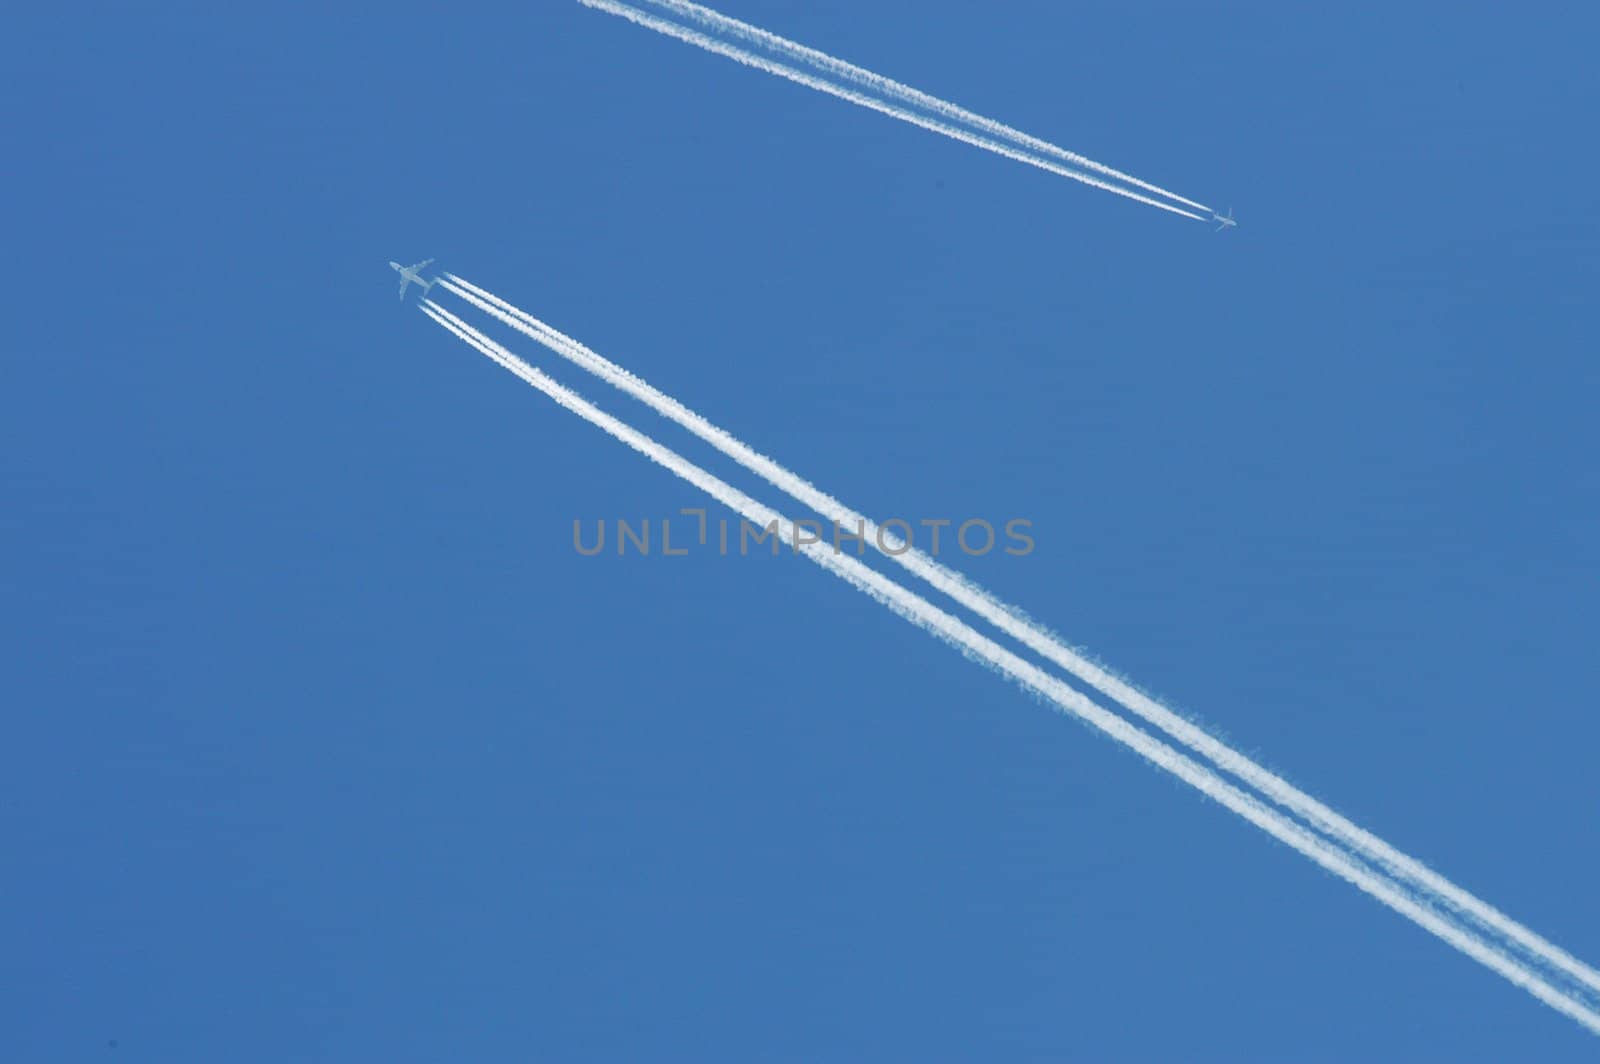 Flying airoplanes on the blue sky leaving white lines behind